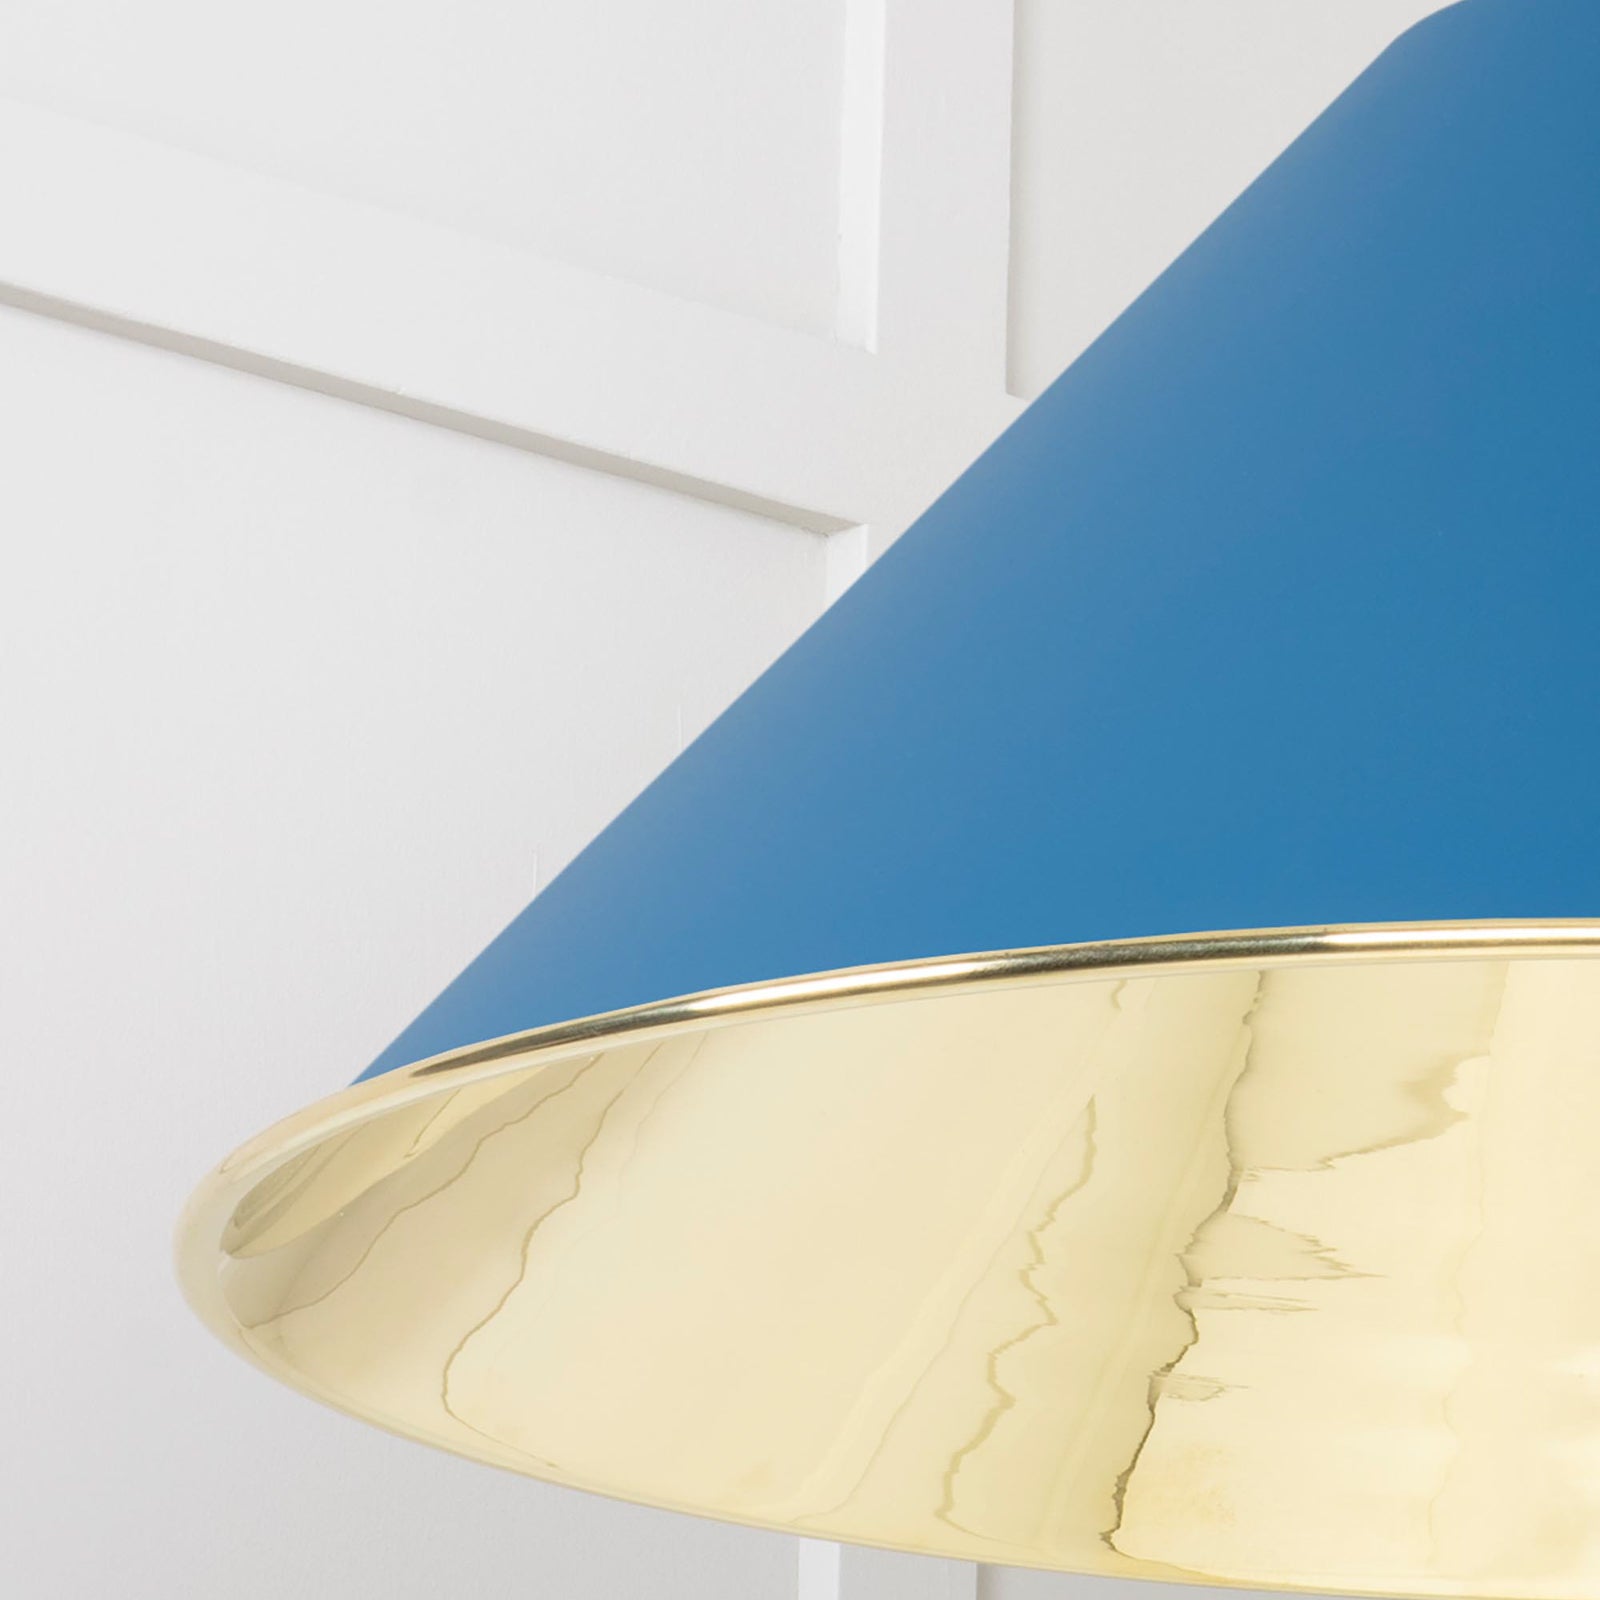 SHOW Close Up Image of Hockley Ceiling Light in Upstream